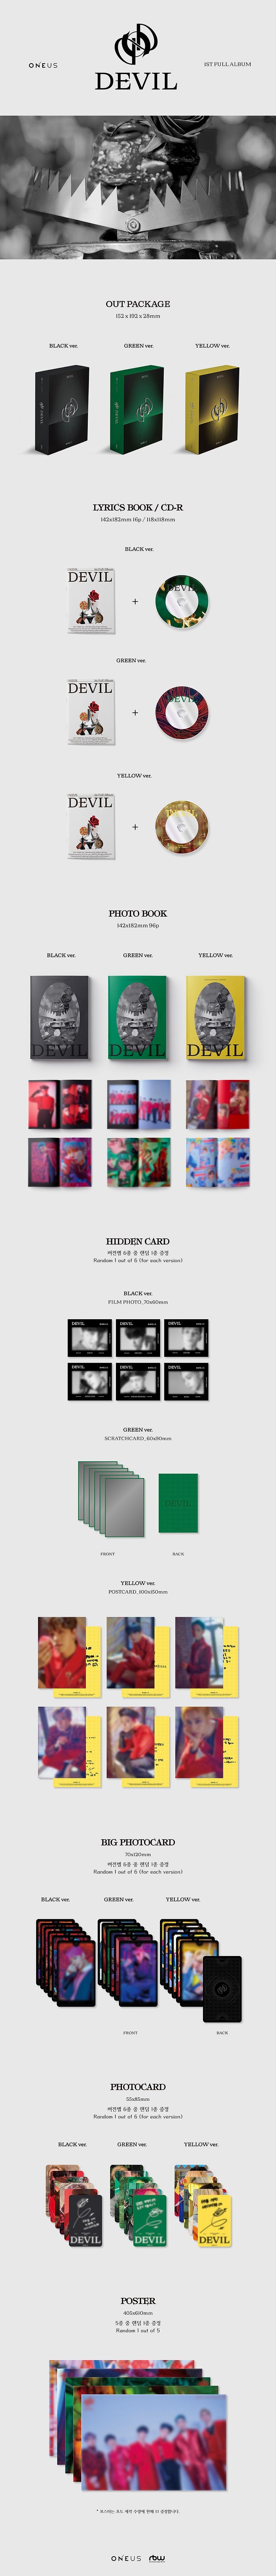 1 CD
1 Lyrics Book (16 pages)
1 Photo Book (96 pages)
1 Hidden Card
2 Photo Cards